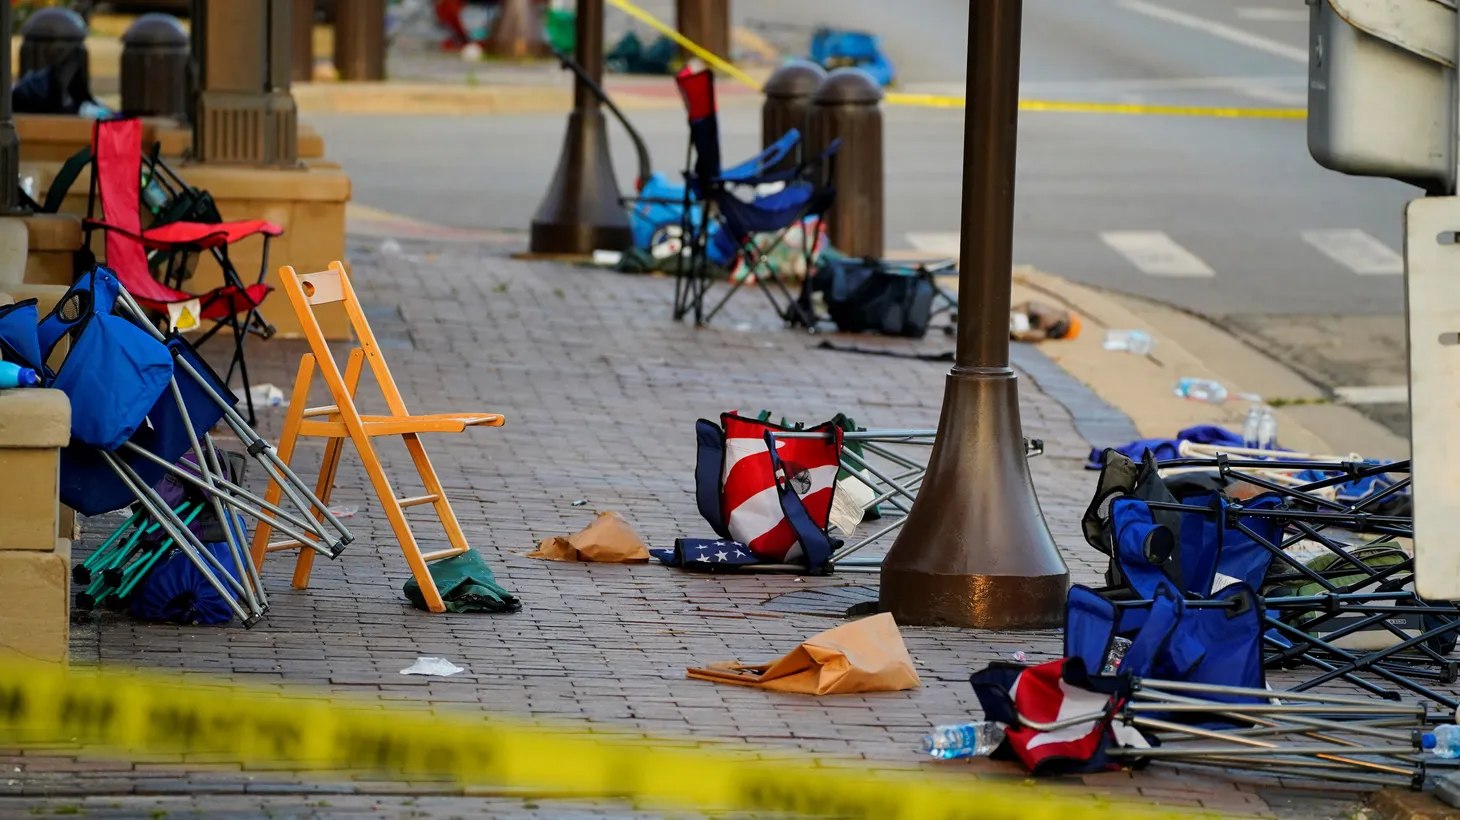 People’s belongings lie abandoned along the parade route after a mass shooting at a Fourth of July parade in the Chicago suburb of Highland Park, Illinois, July 5, 2022.